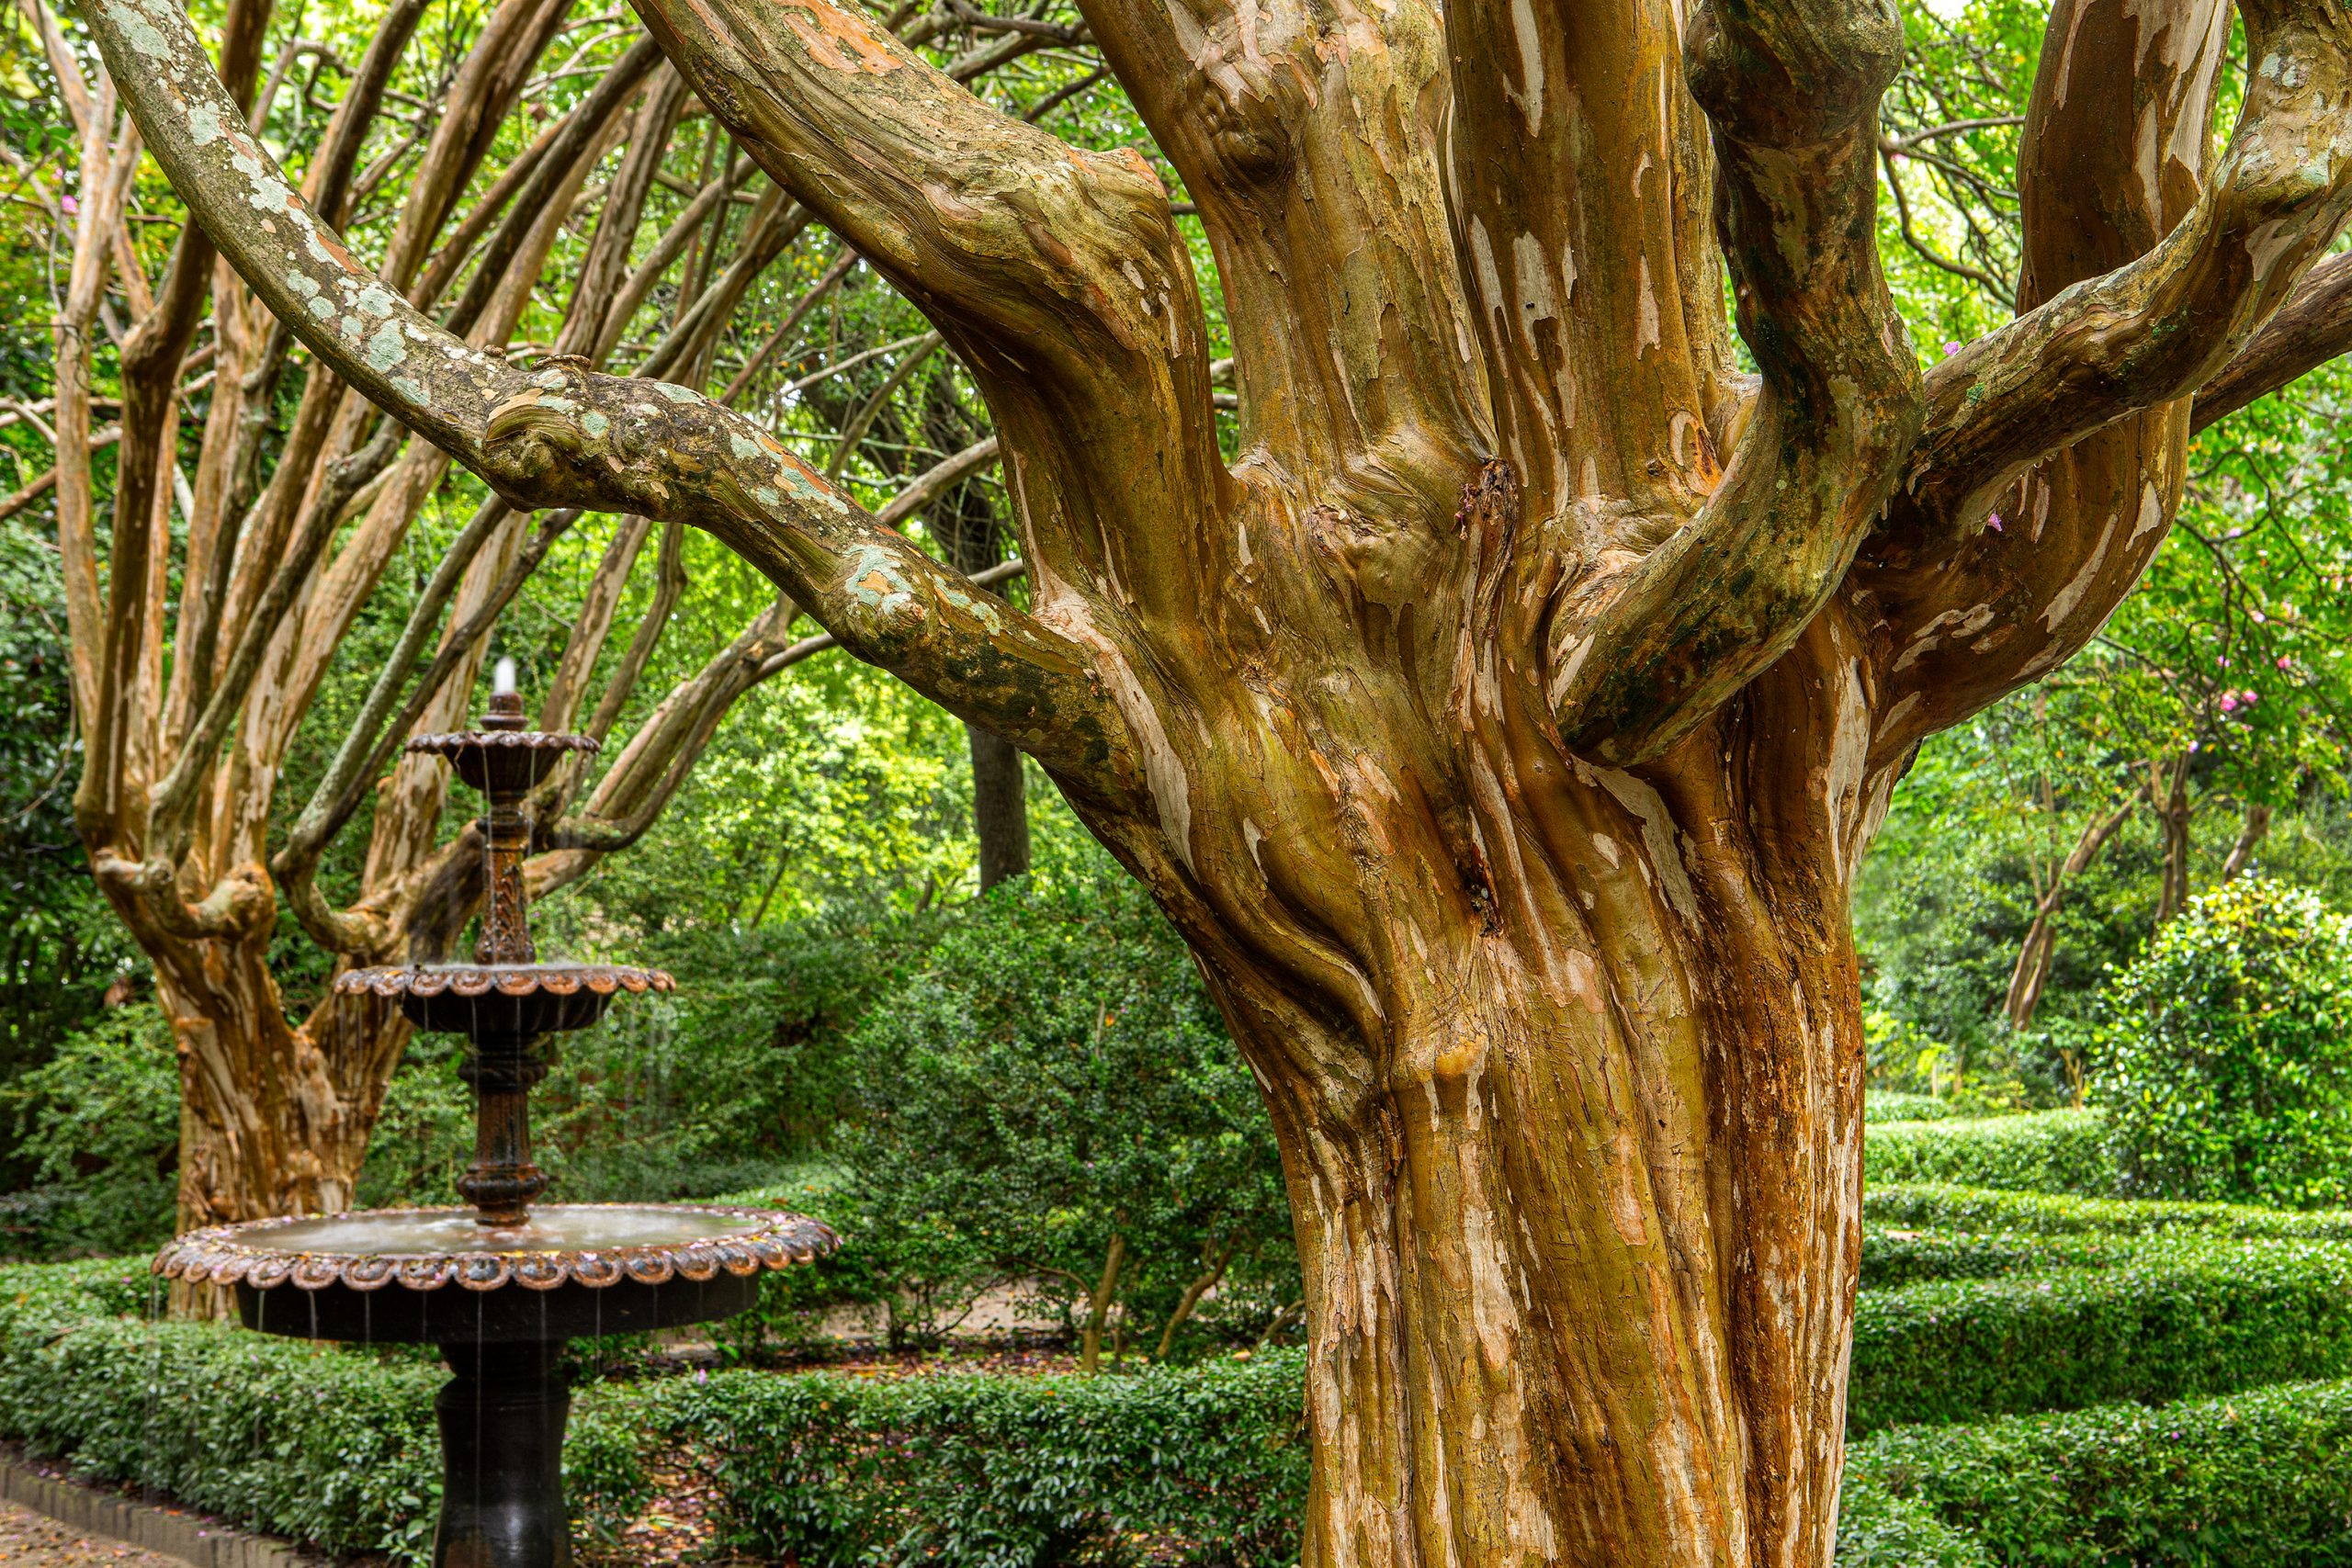  In 1790, the crepe myrtle was first introduced to America in Charleston. These ancient legacy trees frame a garden fountain at the Governor’s Mansion in Columbia.